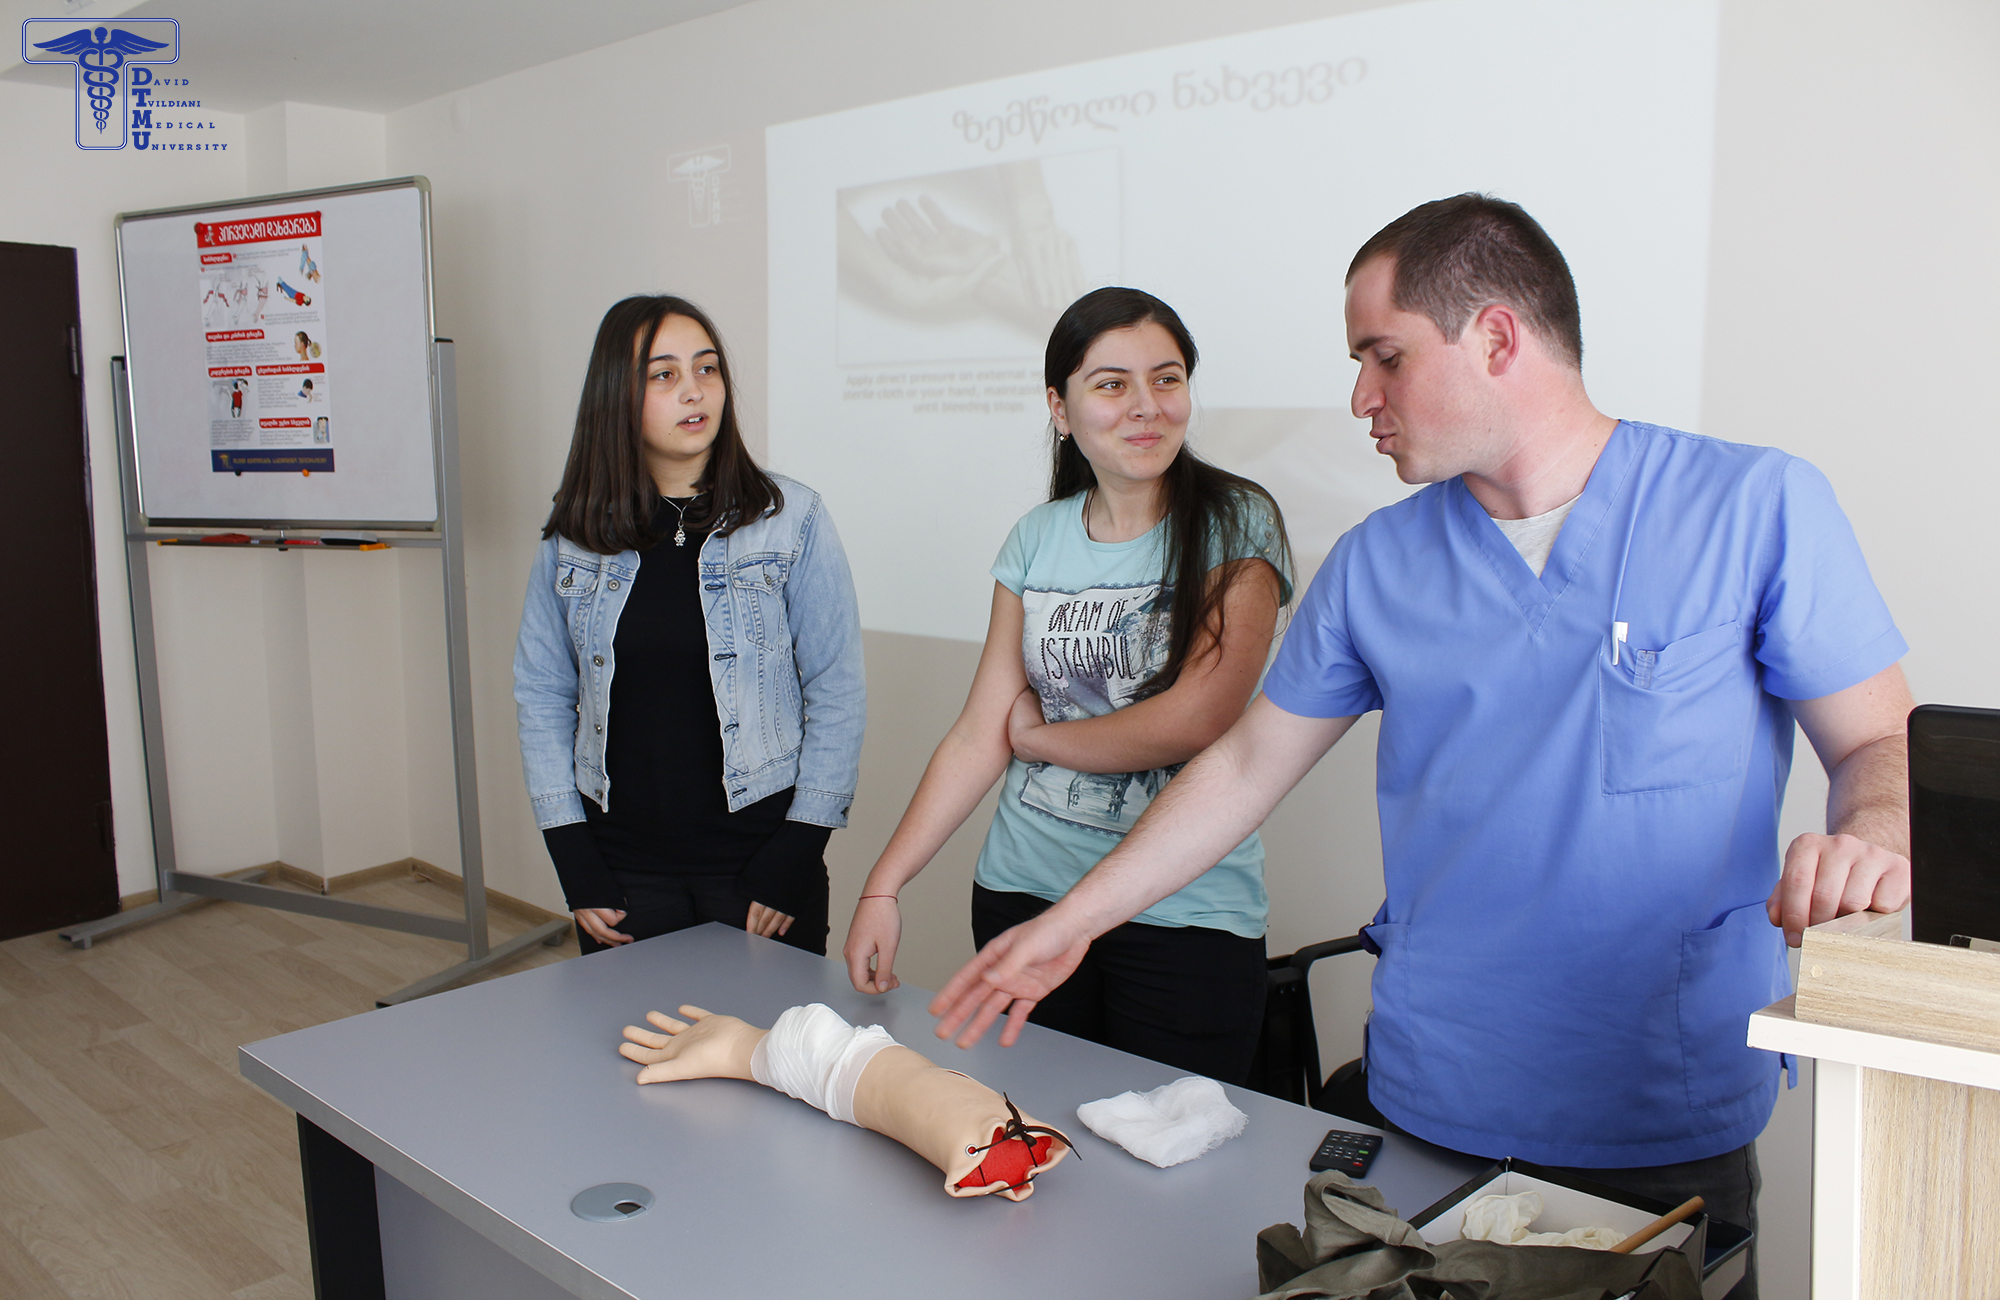 First Aid Training- 13th of May